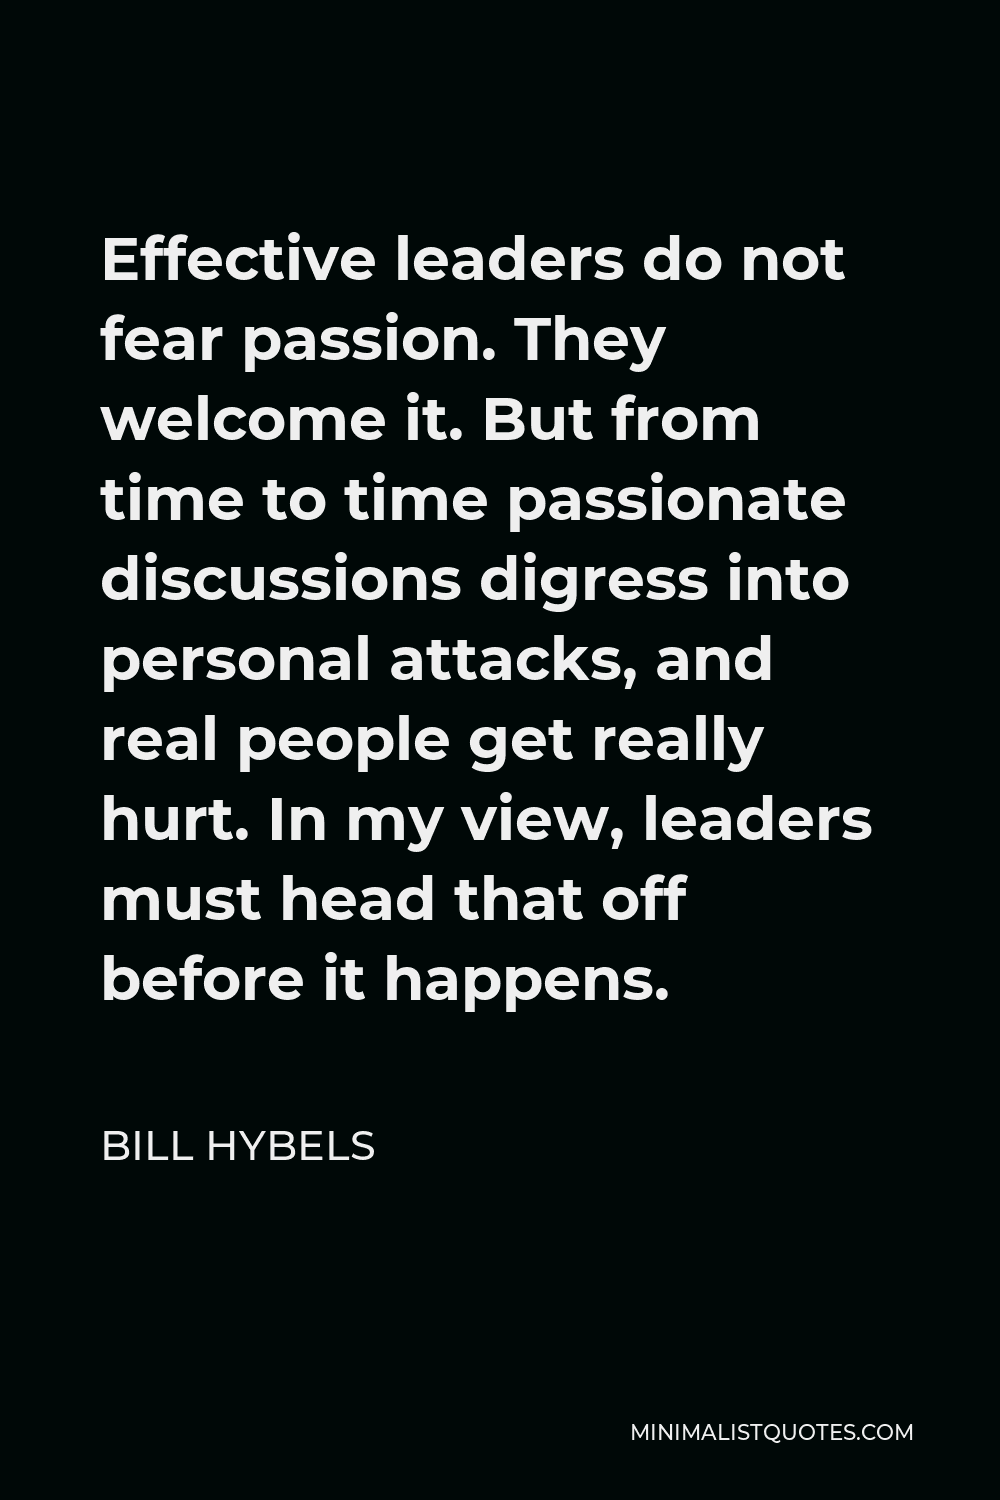 Bill Hybels Quote - Effective leaders do not fear passion. They welcome it. But from time to time passionate discussions digress into personal attacks, and real people get really hurt. In my view, leaders must head that off before it happens.